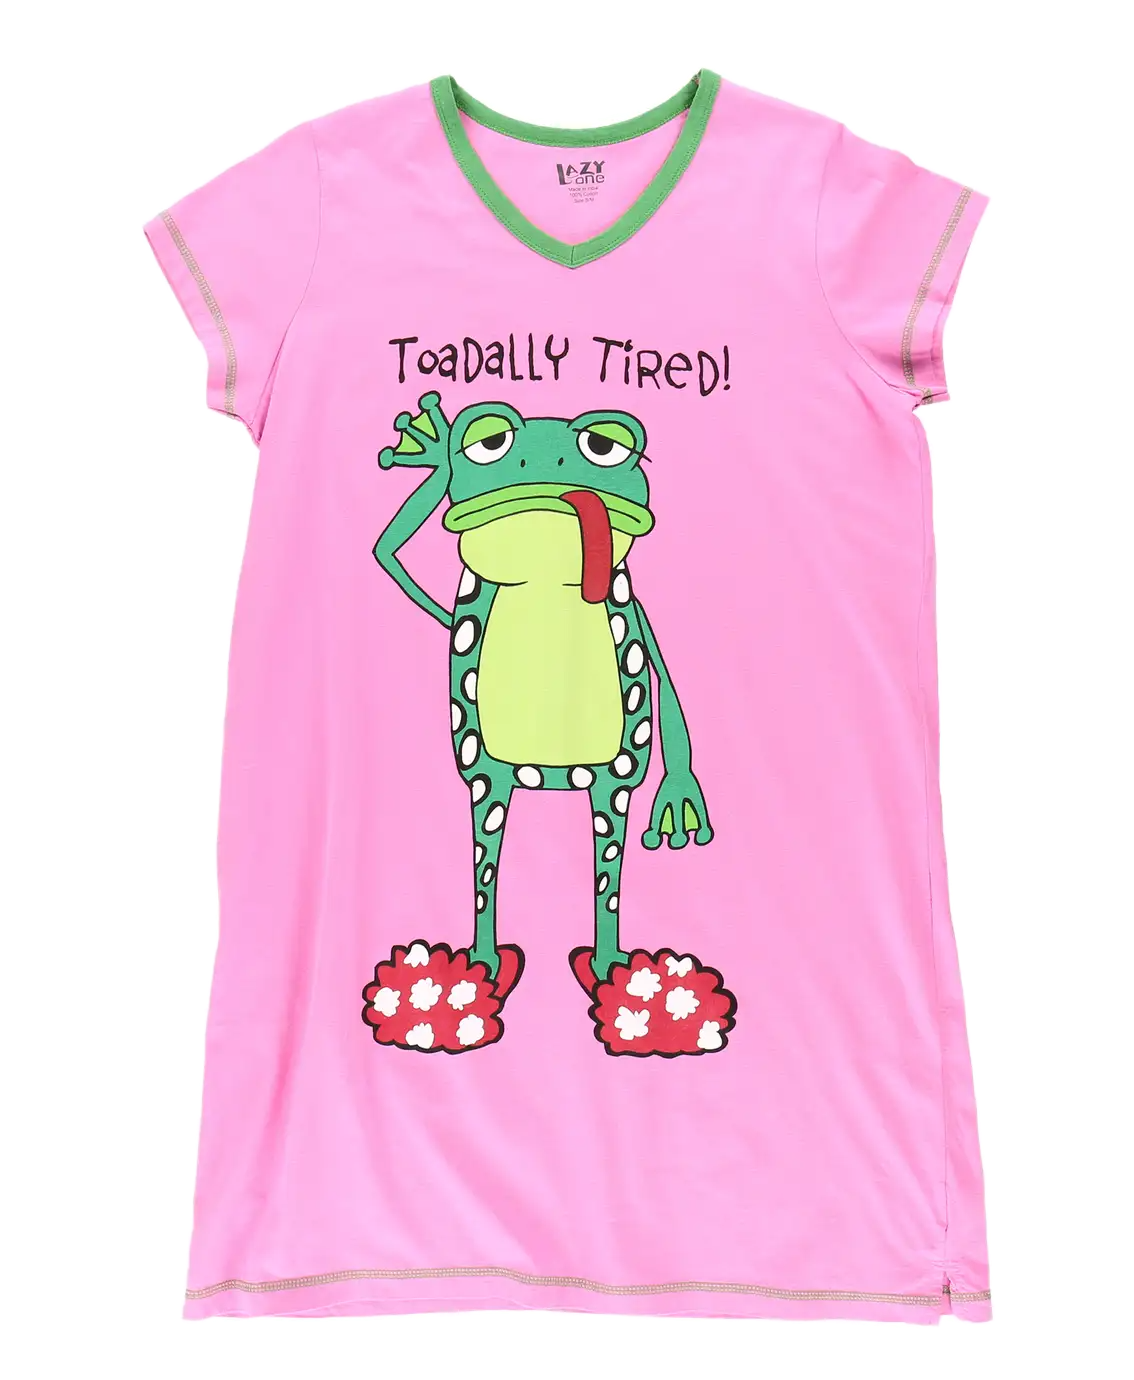 Toadally Tired Nightshirt - S/M